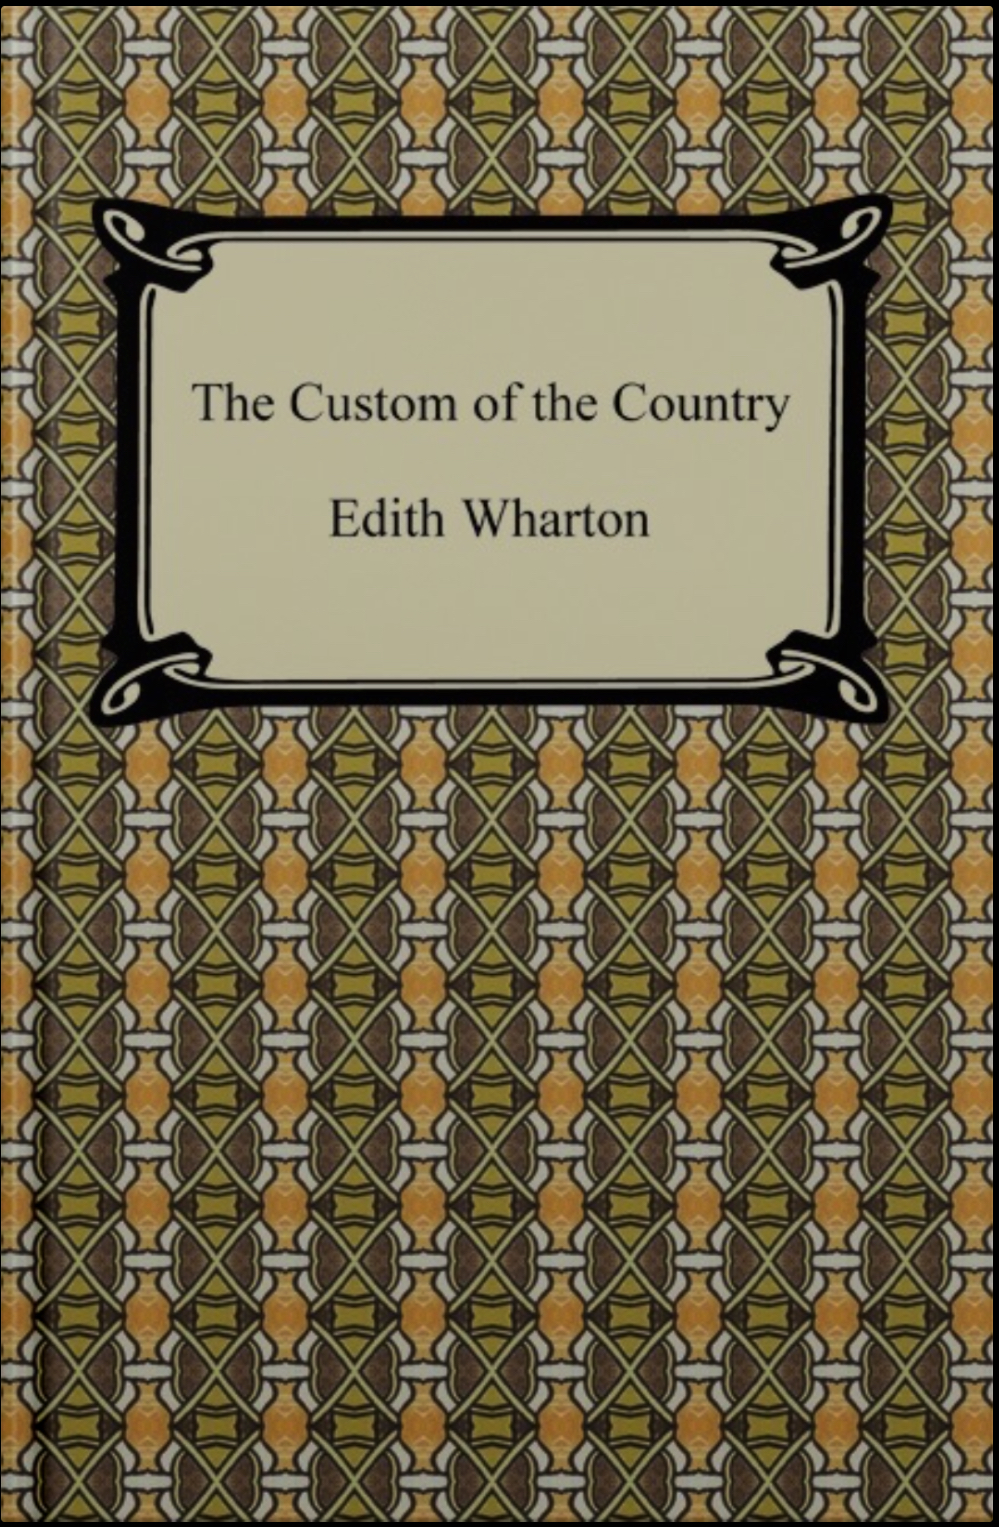 The Custom of the Country is the seventh book in my second list of books